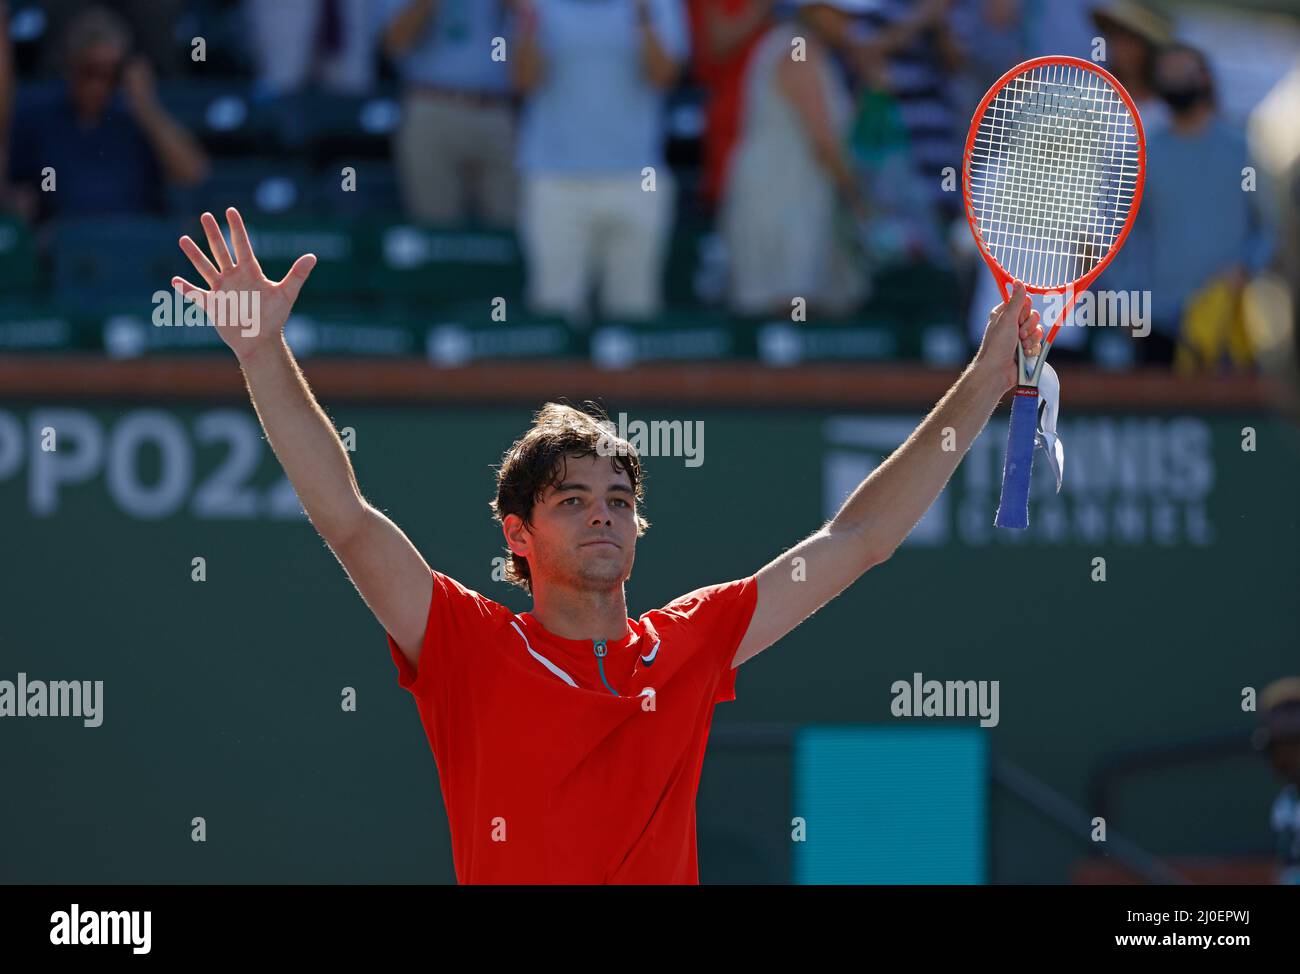 Indian Wells, USA. 18th Mar, 2022. March 18, 2022 Taylor Fritz celebrates  winning his match against Miomir Kecmanovic of Serbia in their quarterfinal  match of the 2022 BNP Paribas Open at Indian